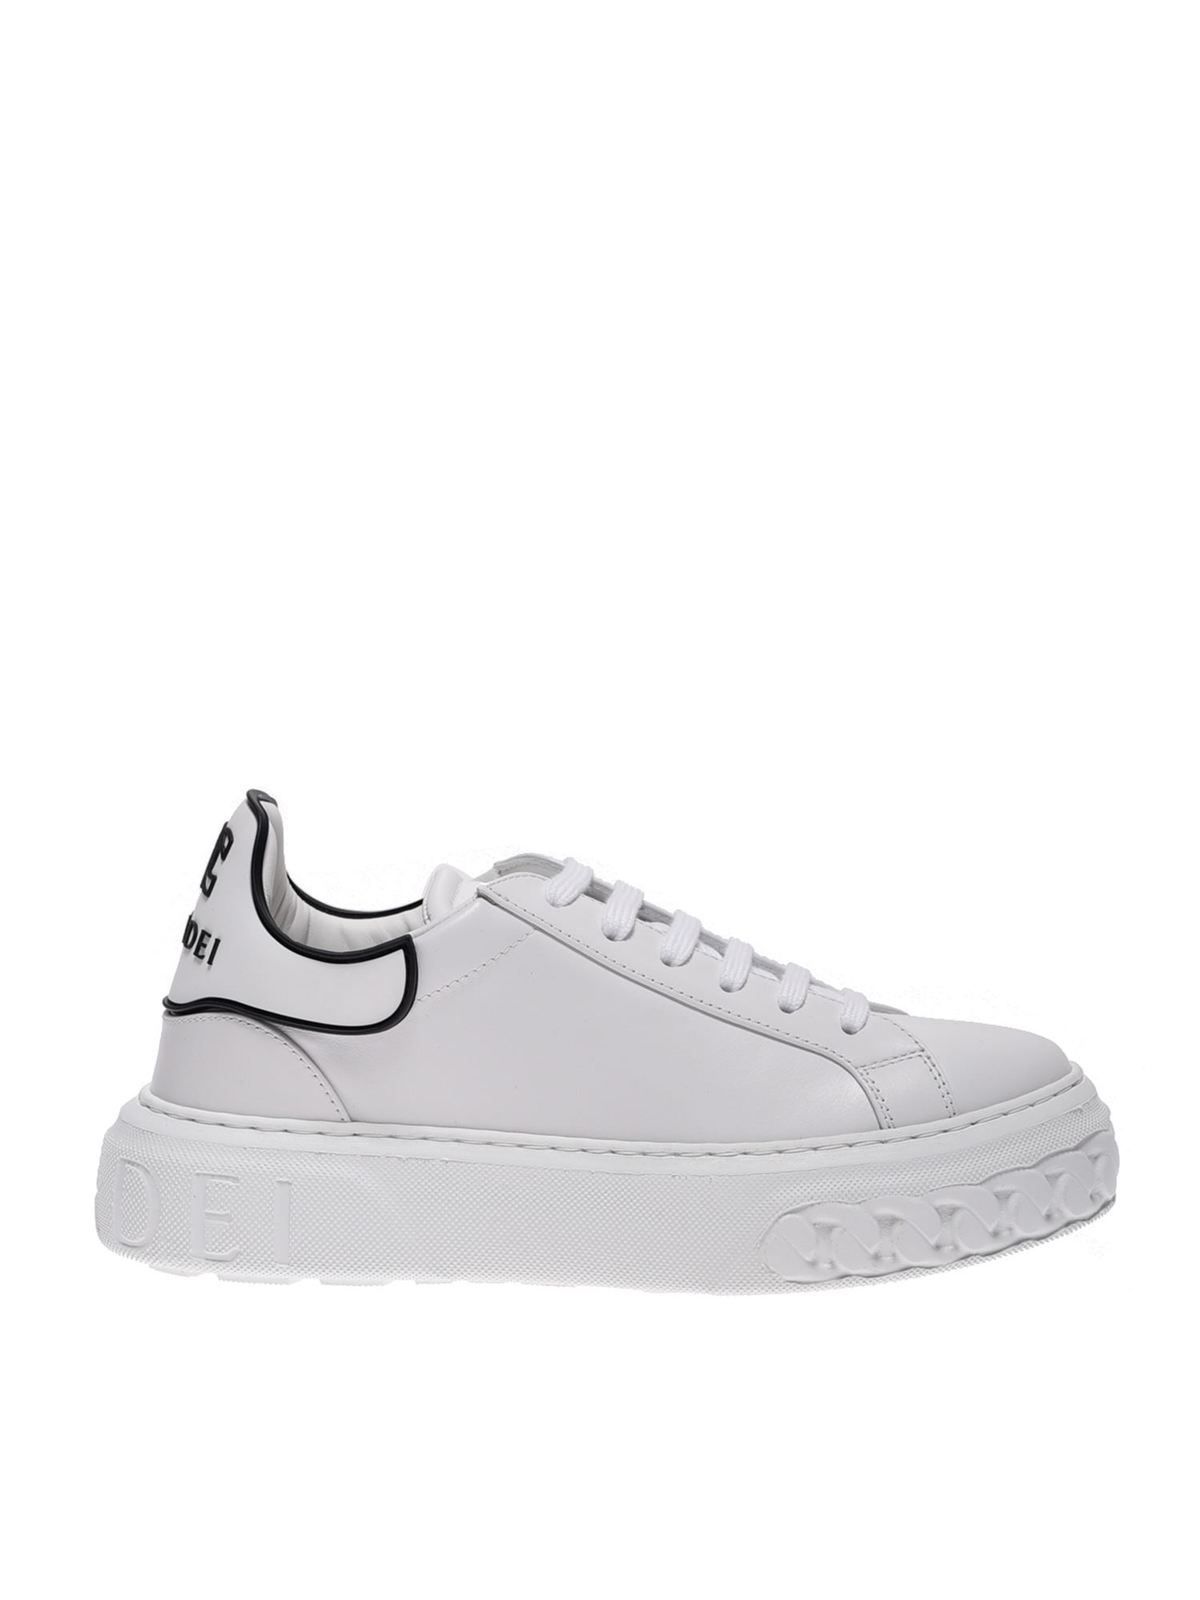 CASADEI OFF-ROAD C CHAIN trainers IN WHITE